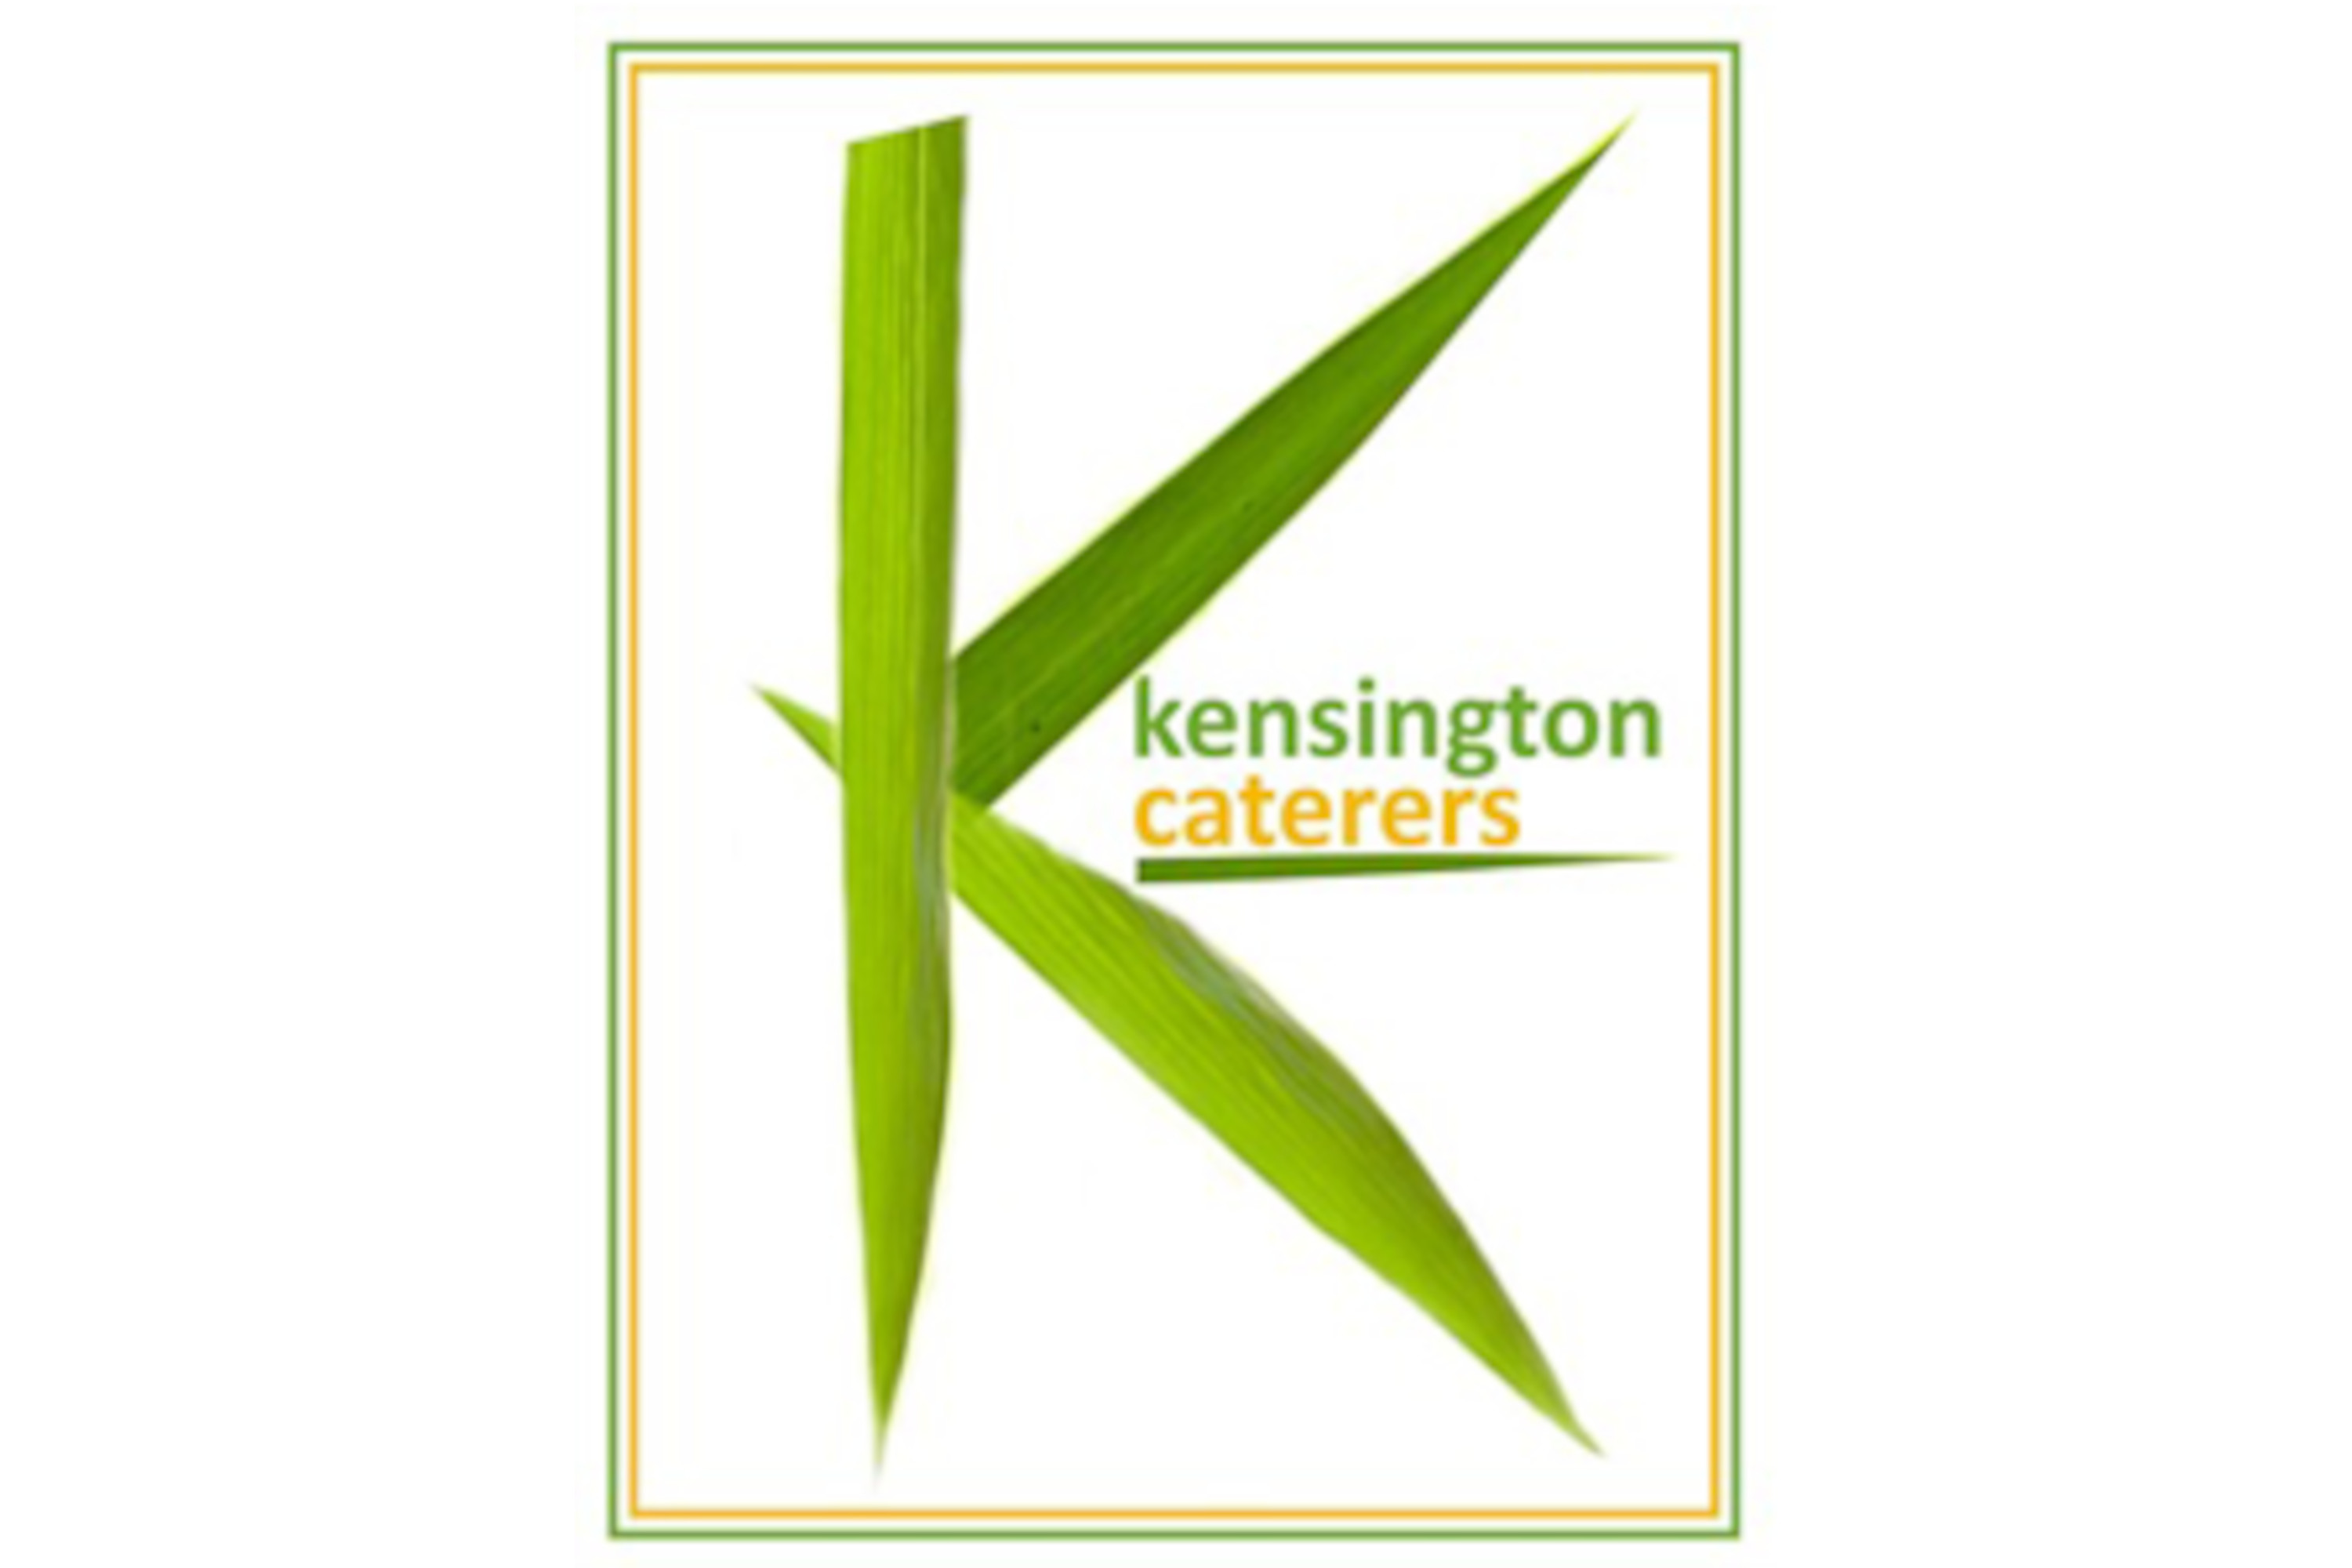 Image reads Kensington Caterers in green and yellow stylized text alongside a large K made of leaf-like or bamboo green strokes.